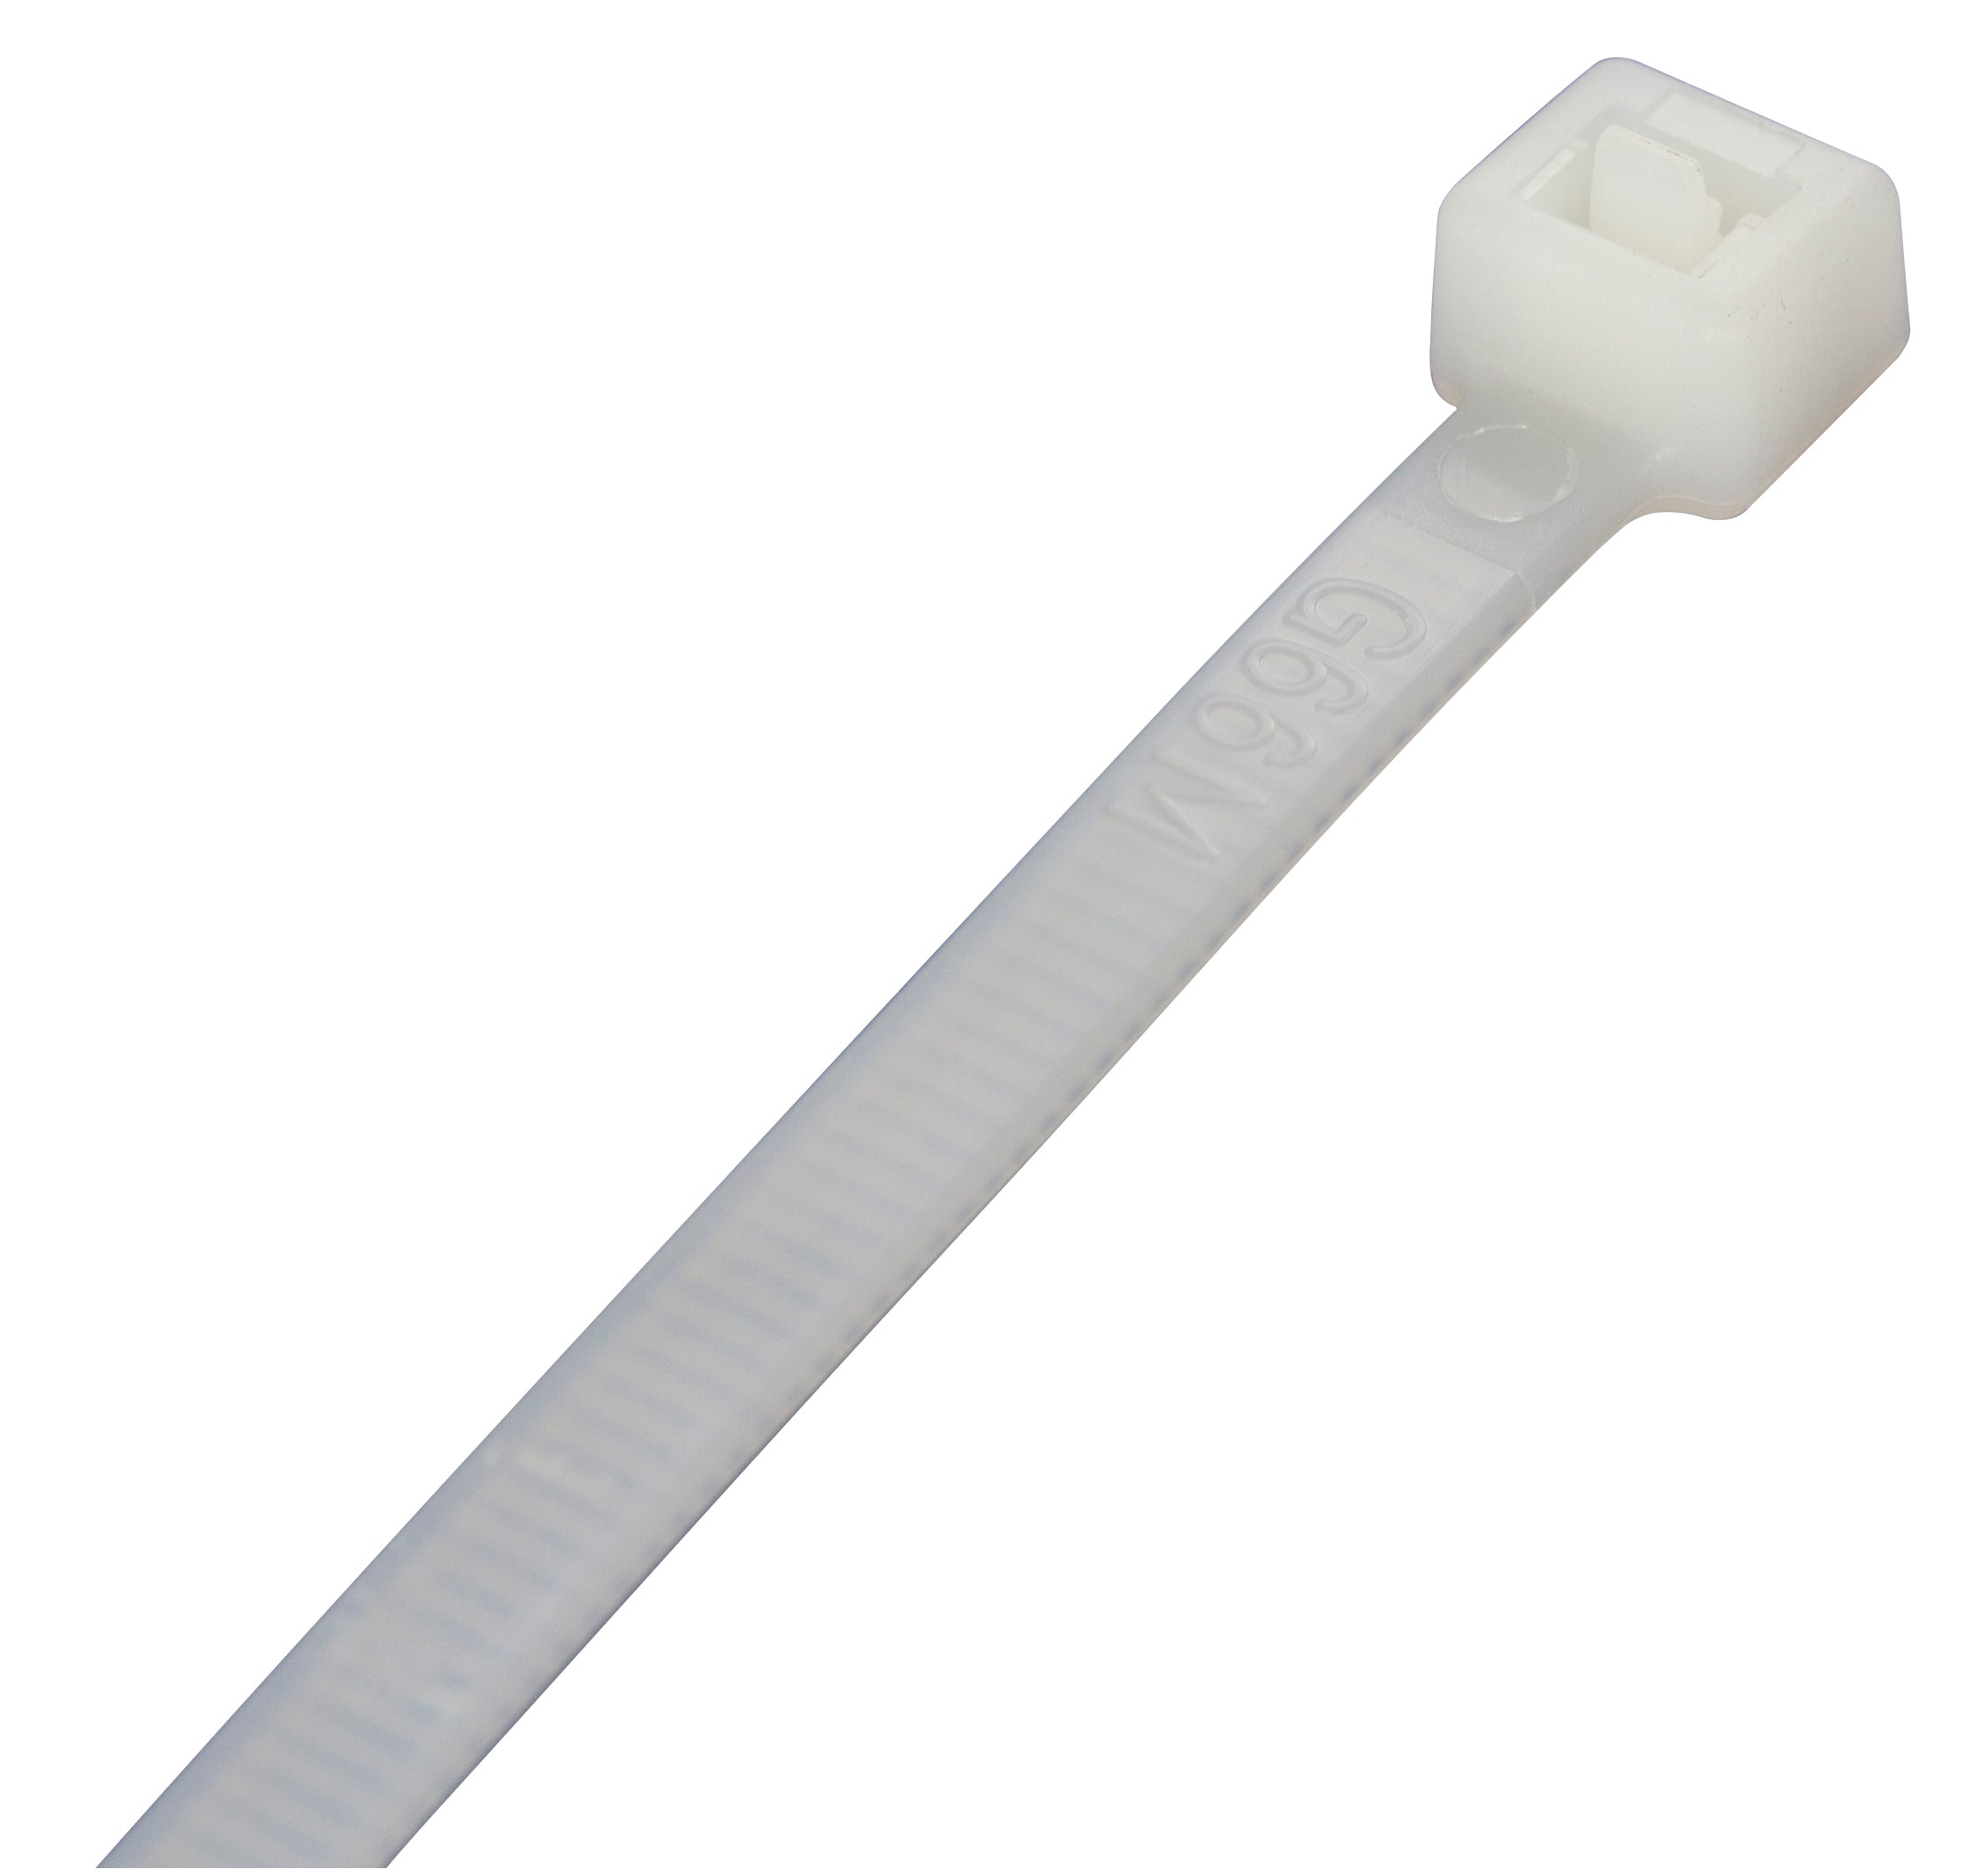 Premium Natural Cable Ties 200mm x 2.5mm - Pack of 100